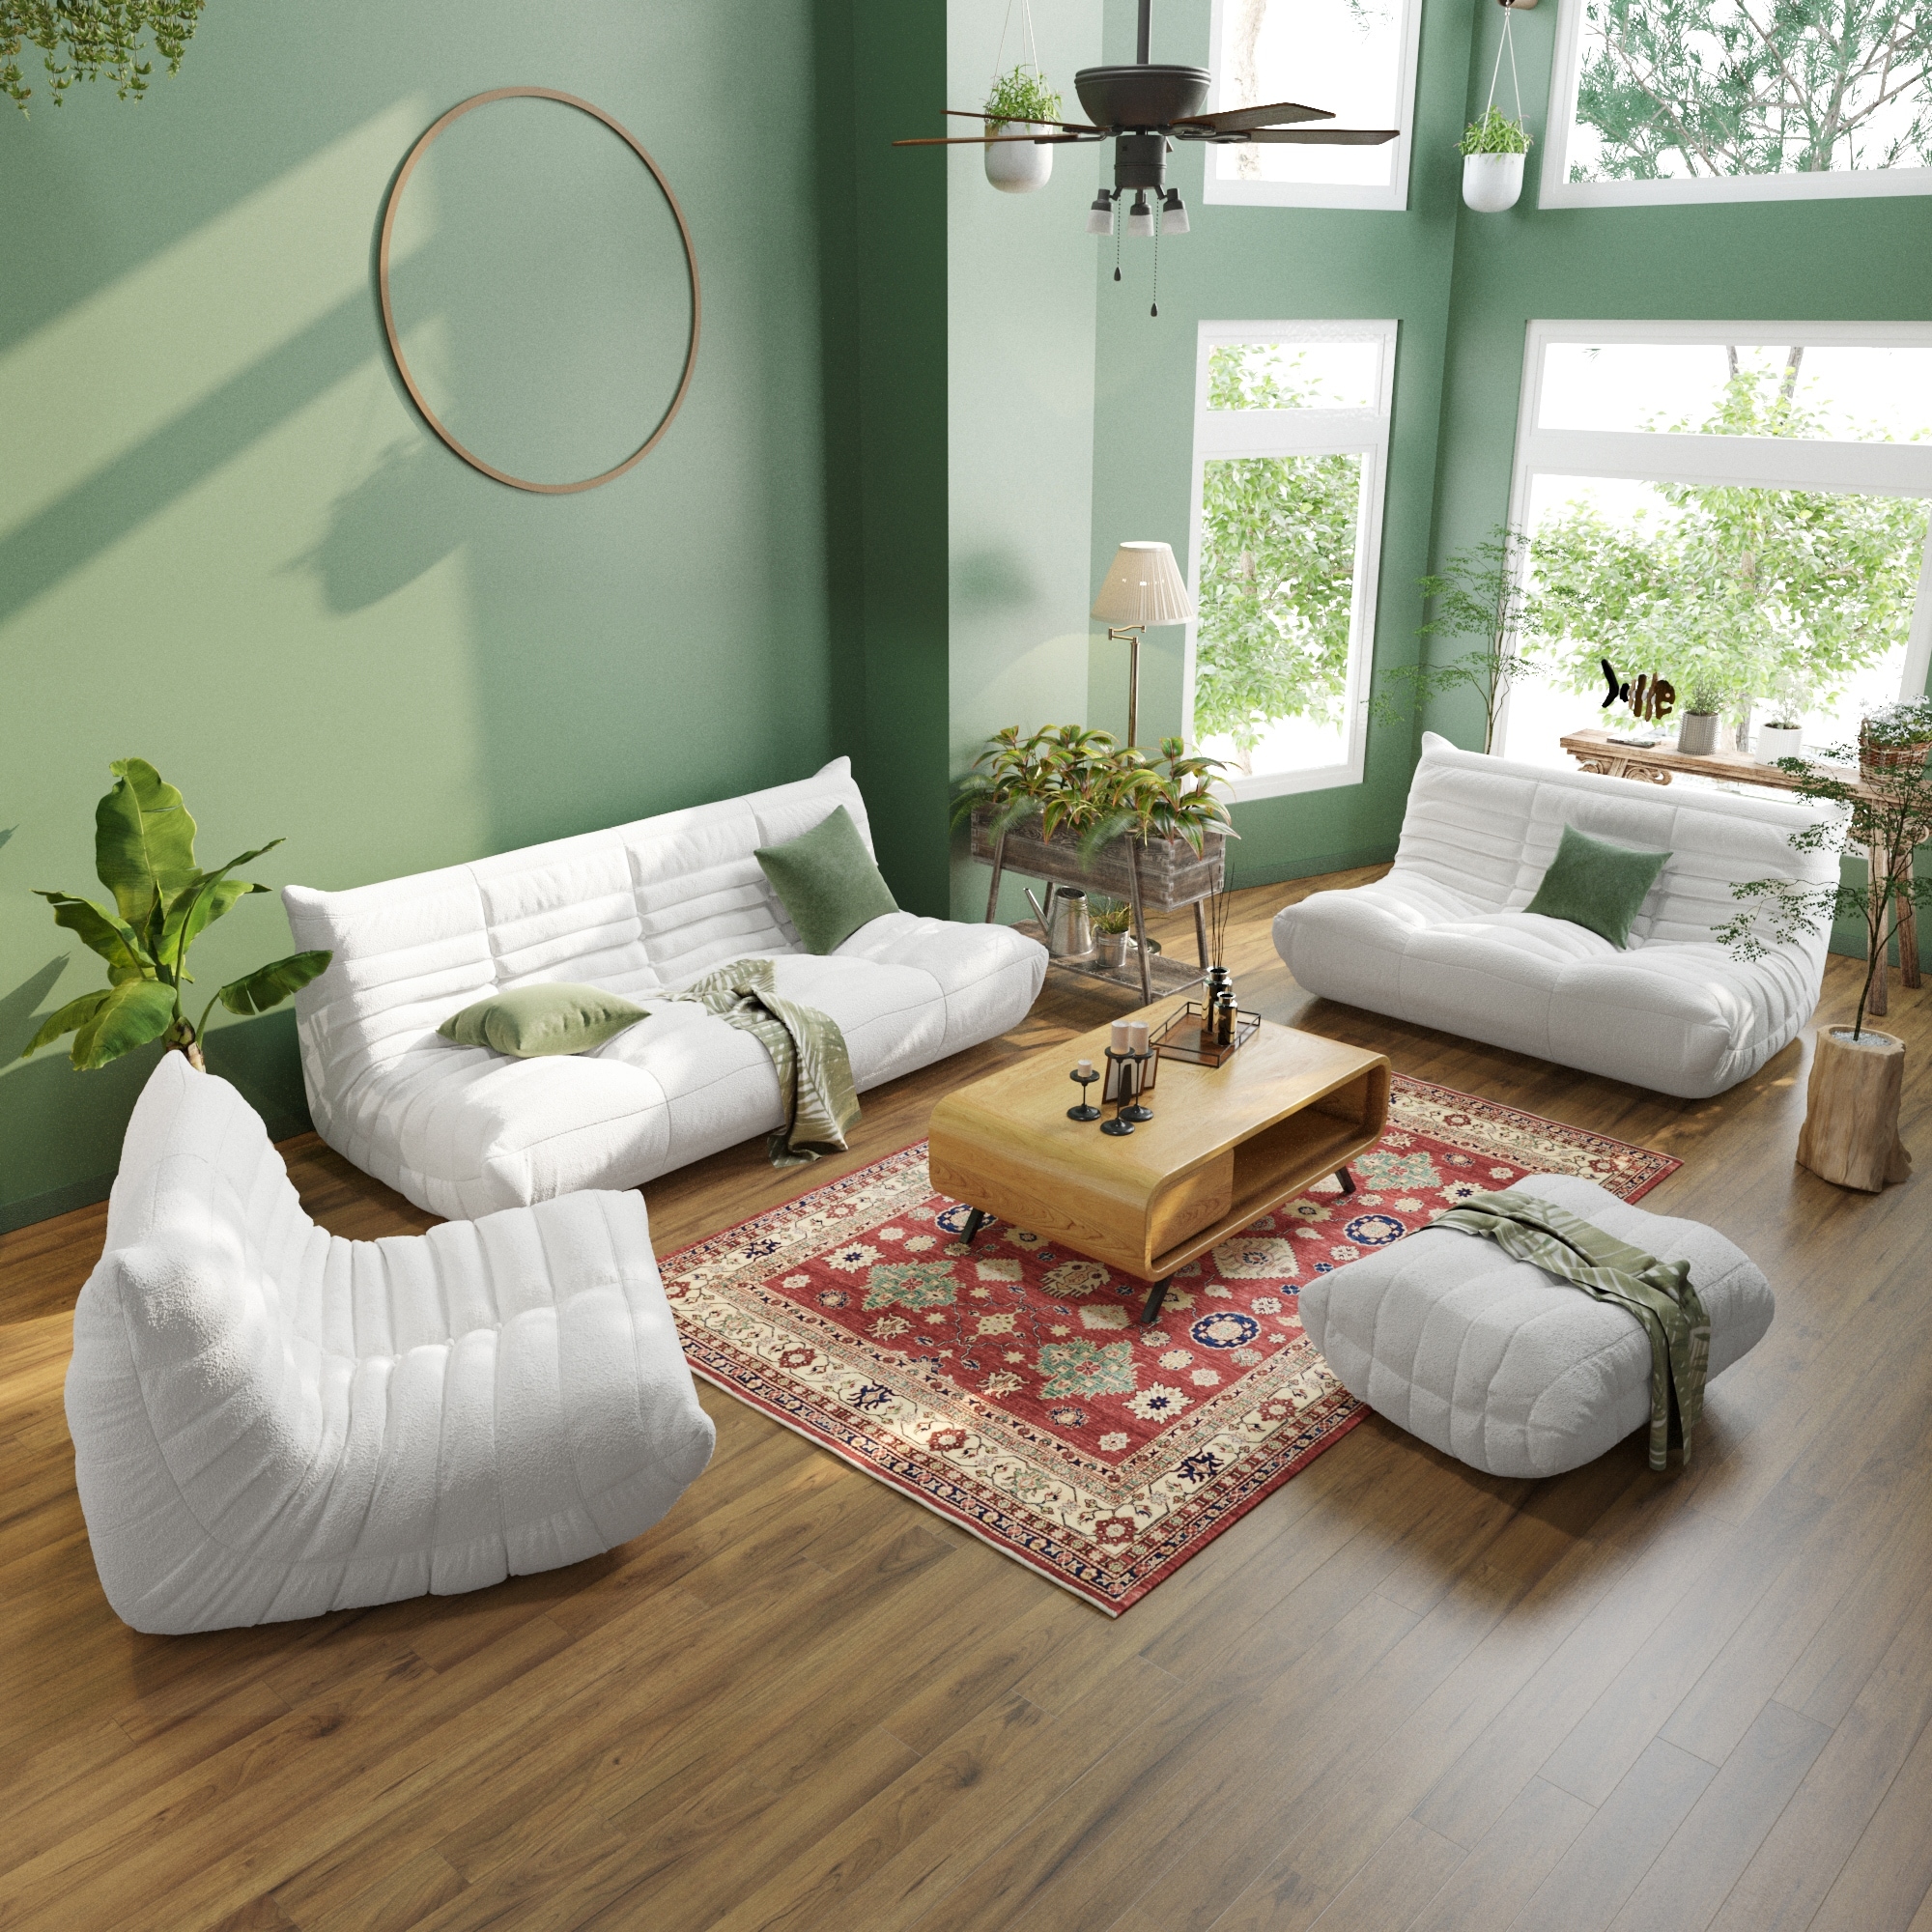 Search for Floor Sofa  Discover our Best Deals at Bed Bath & Beyond